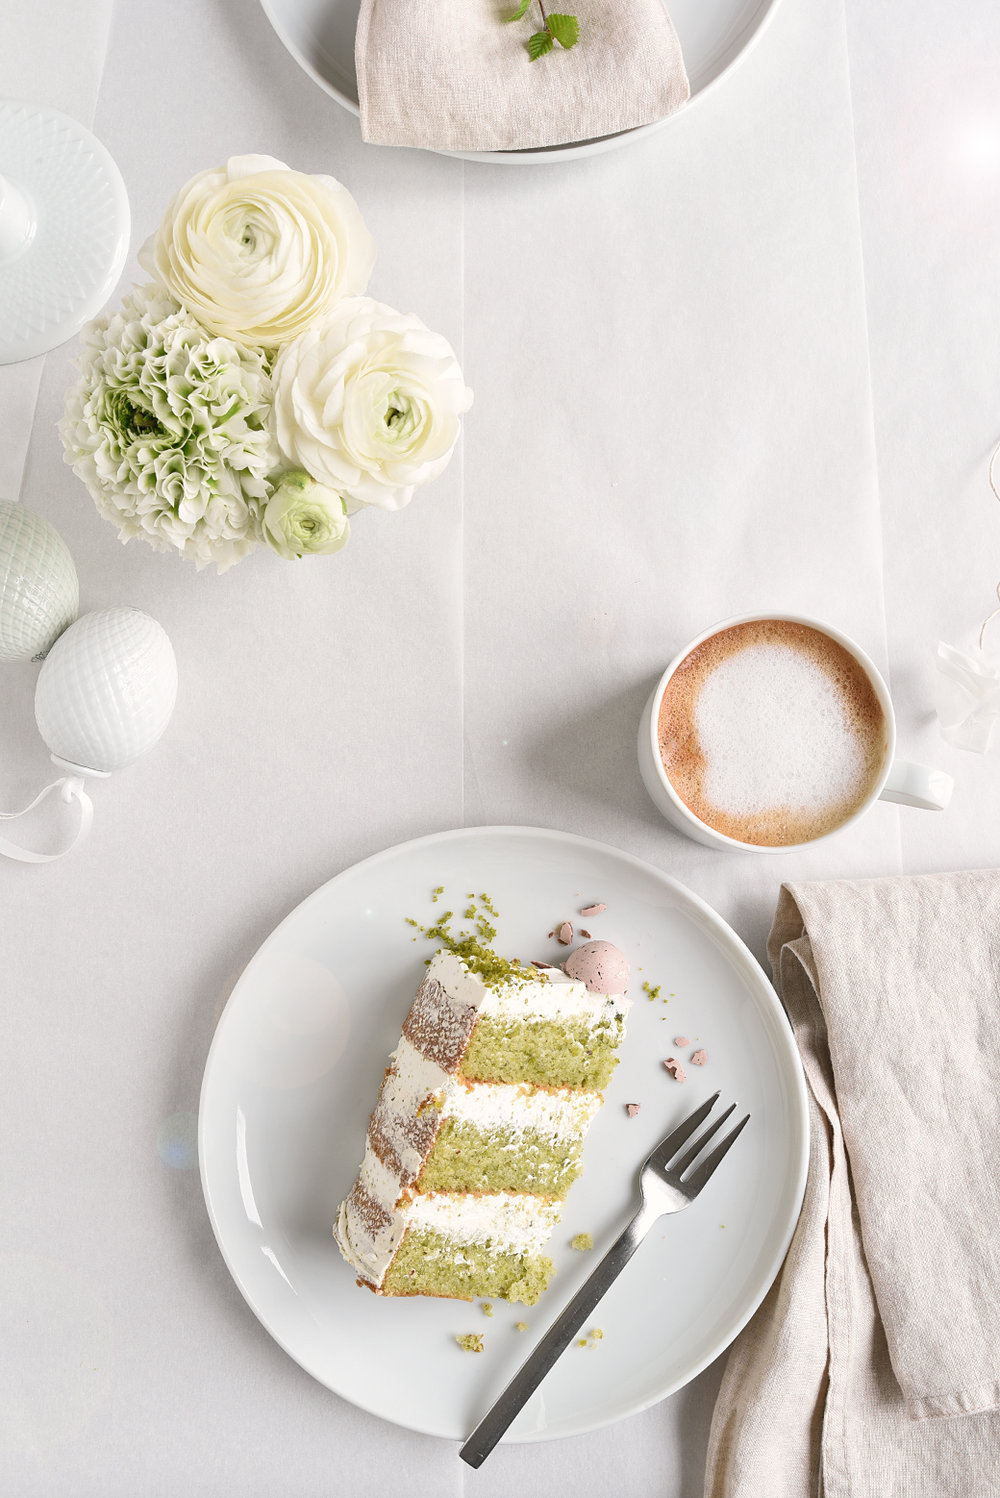 Delicious Easter Cake + Easter Tabletop Decorations